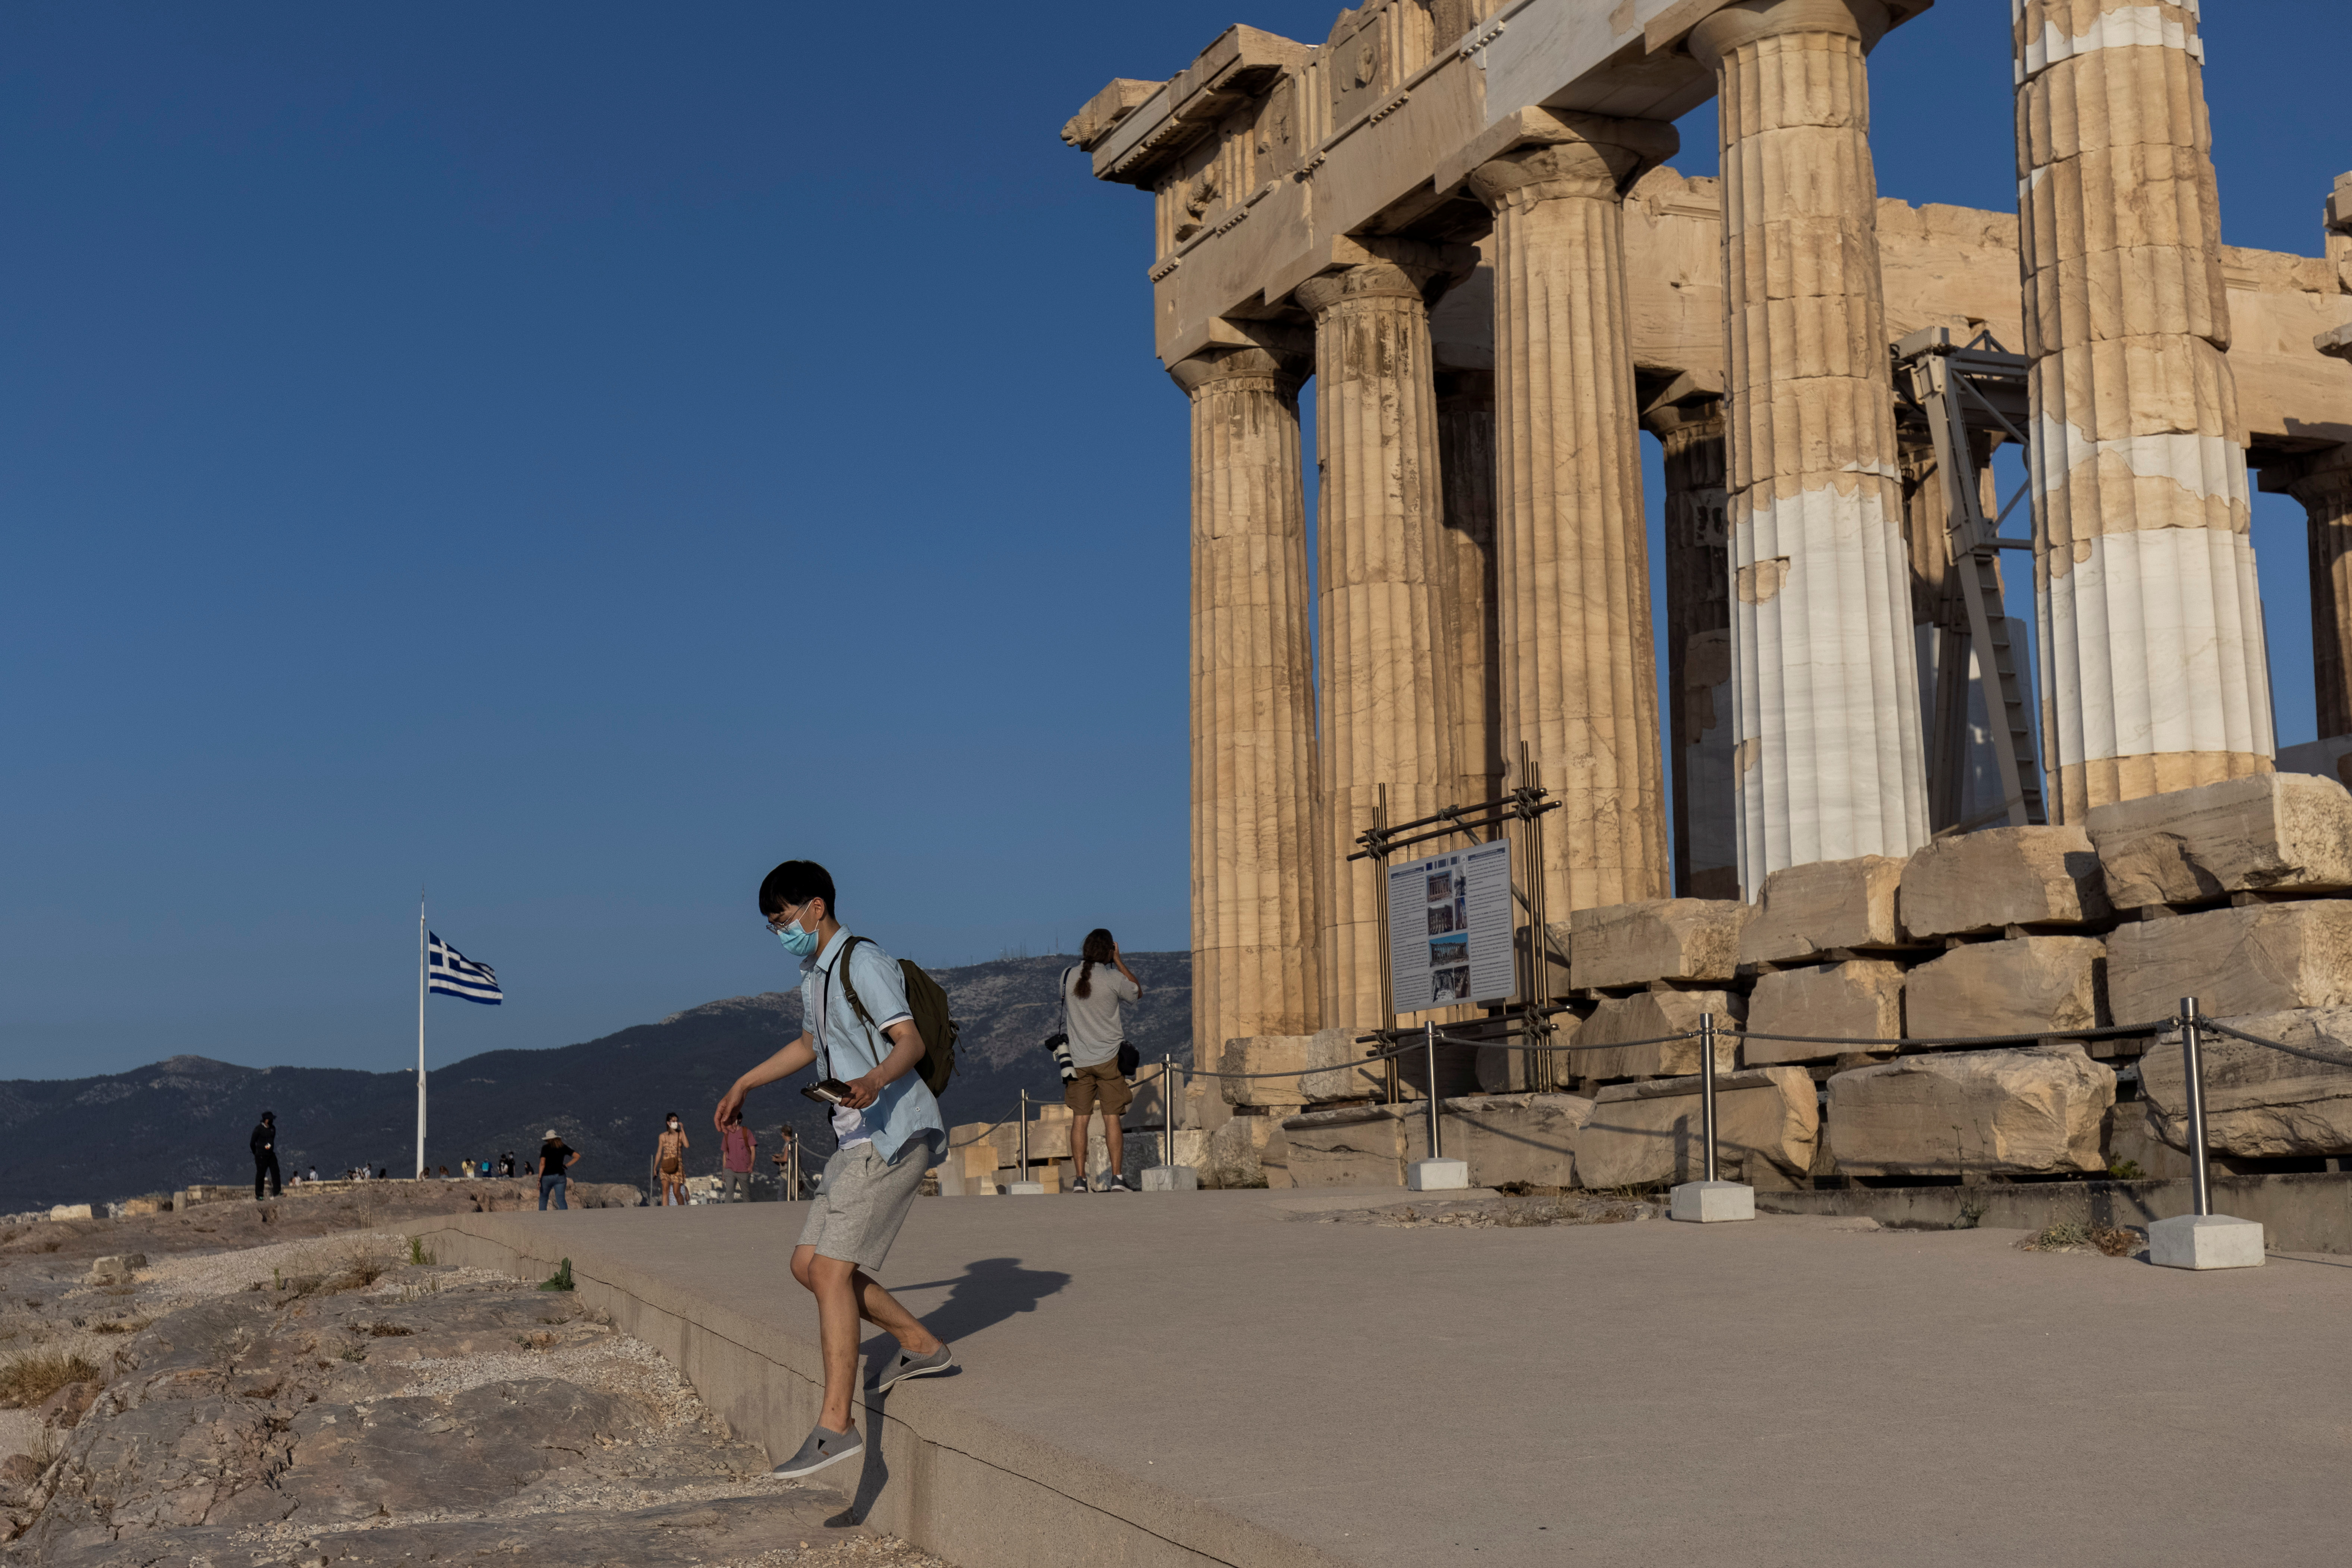 A man steps off a new cement walkway next to the Parthenon temple, built to improve access for people with disabilities atop the Acropolis hill, in Athens